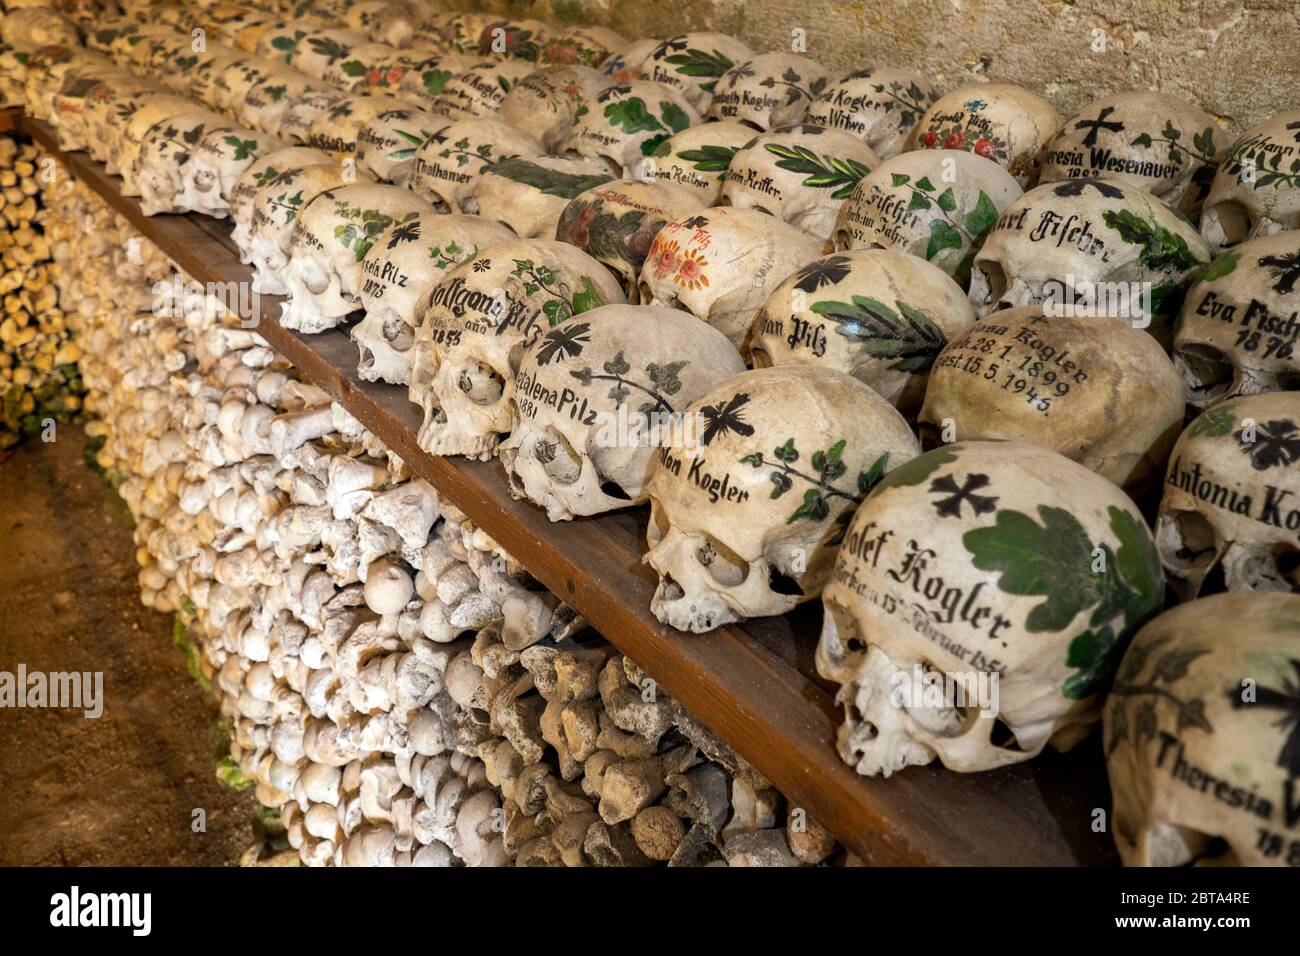 View of hundreds of painted skulls and bones inside the famous charnel house at the mountain village Hallstatt in the Salzkammergut region, Austria Stock Photo